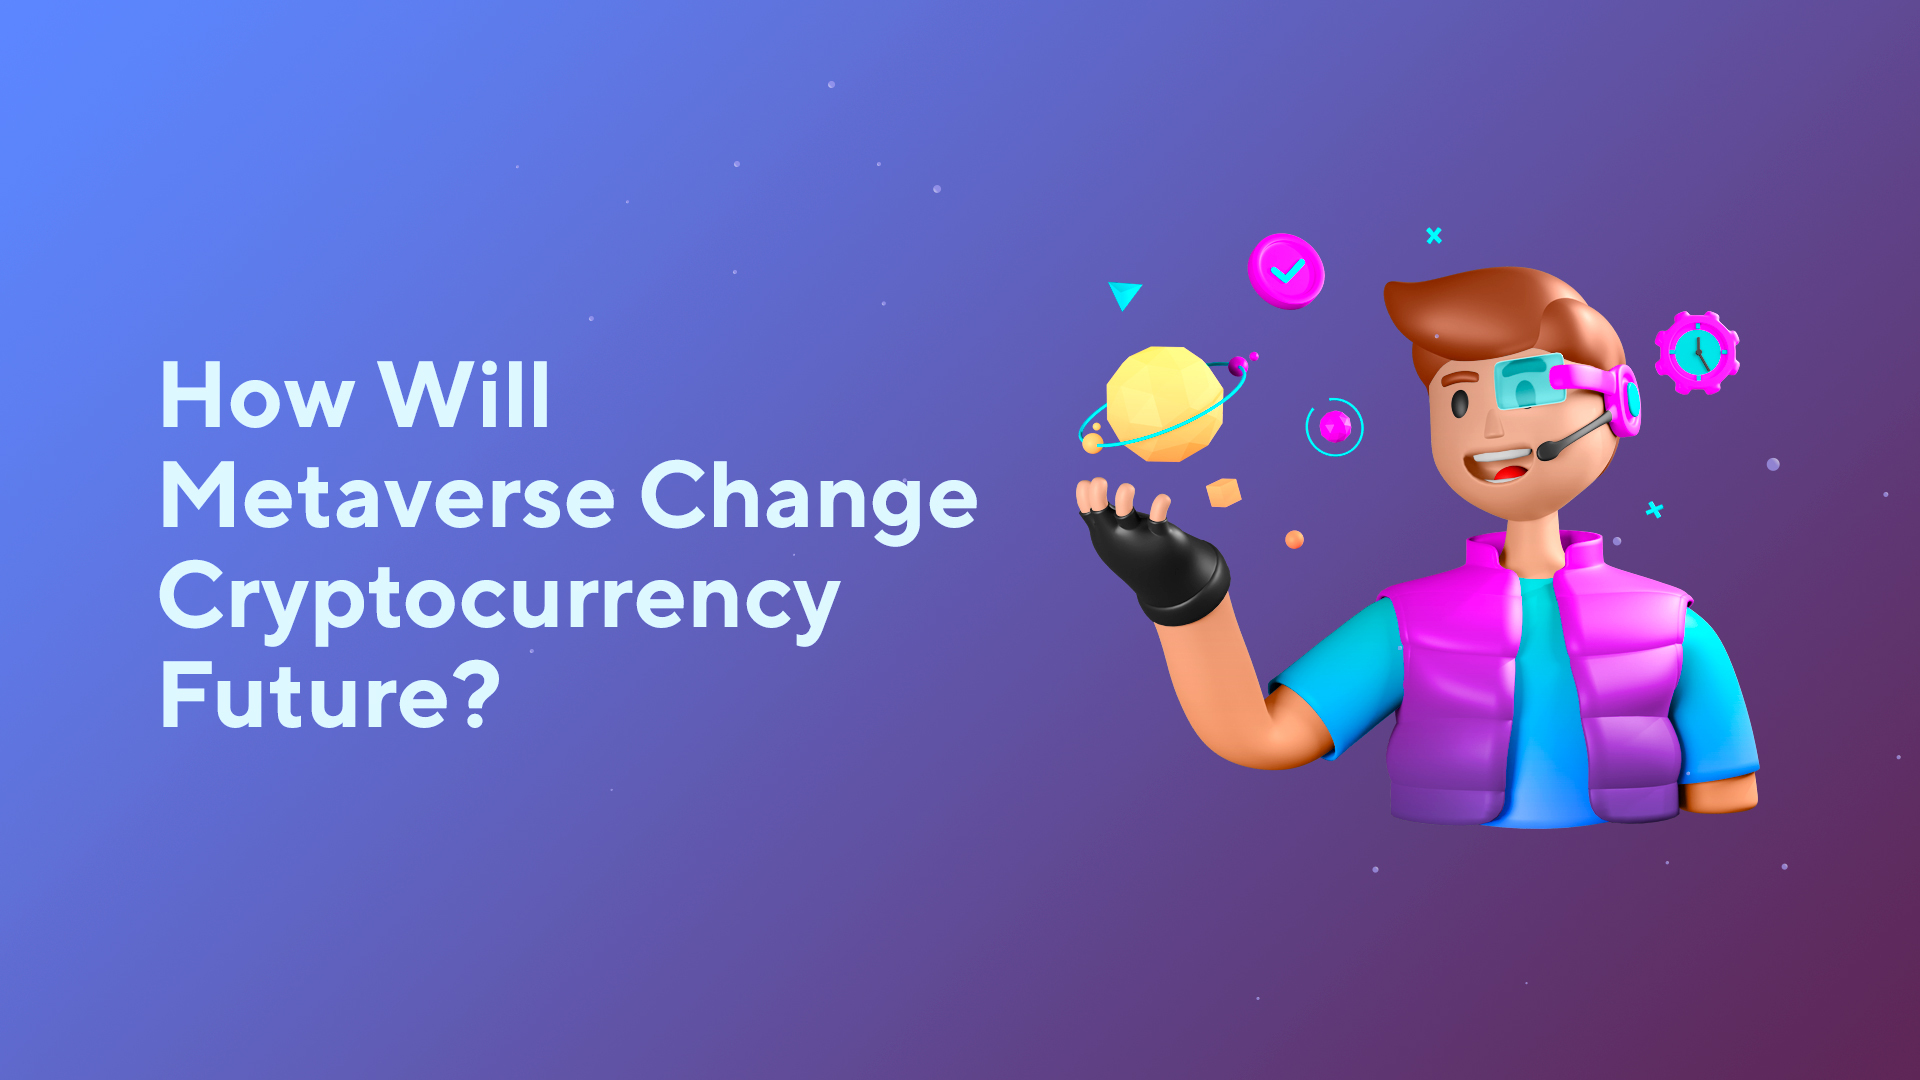 How Will Metaverse Change Cryptocurrency Future?